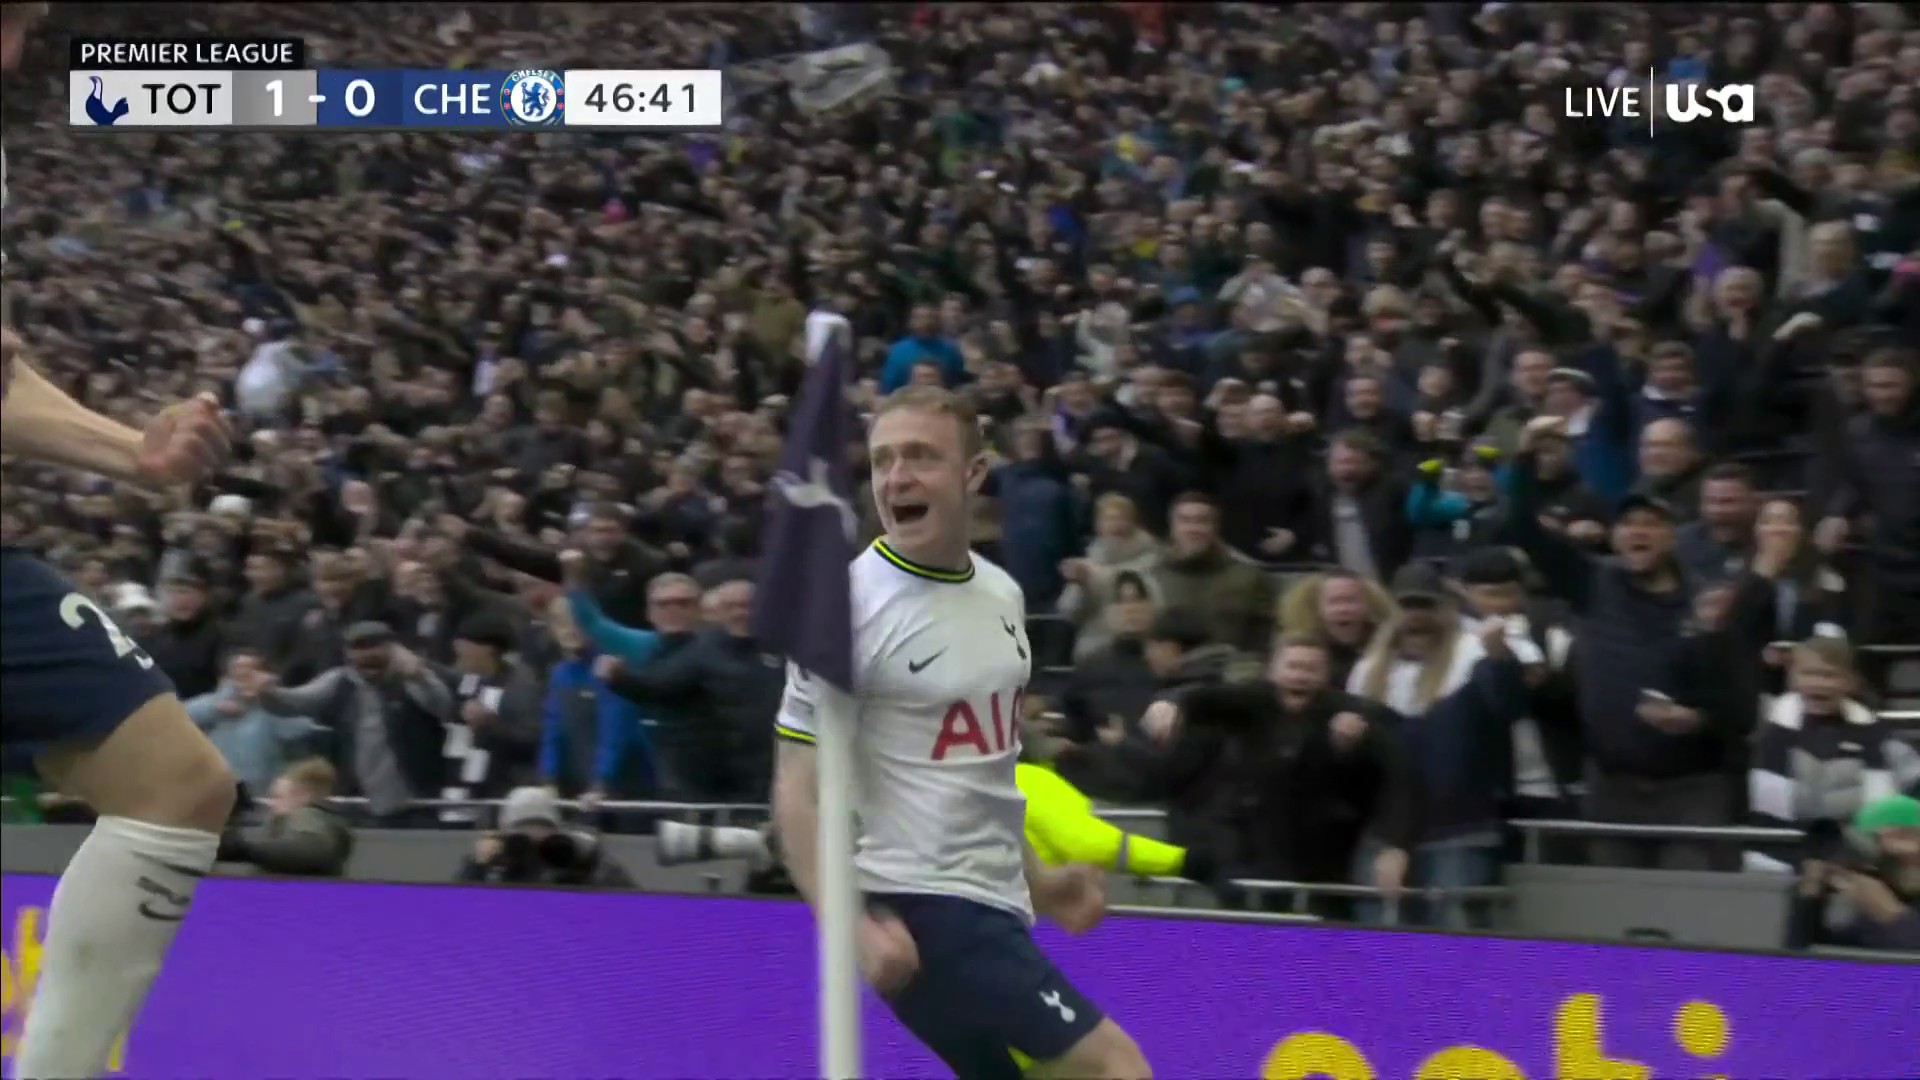 WHAT A START TO THE HALF FOR TOTTENHAM! 

📺: @USANetwork 
#MyPLMorning | #TOTCHE”